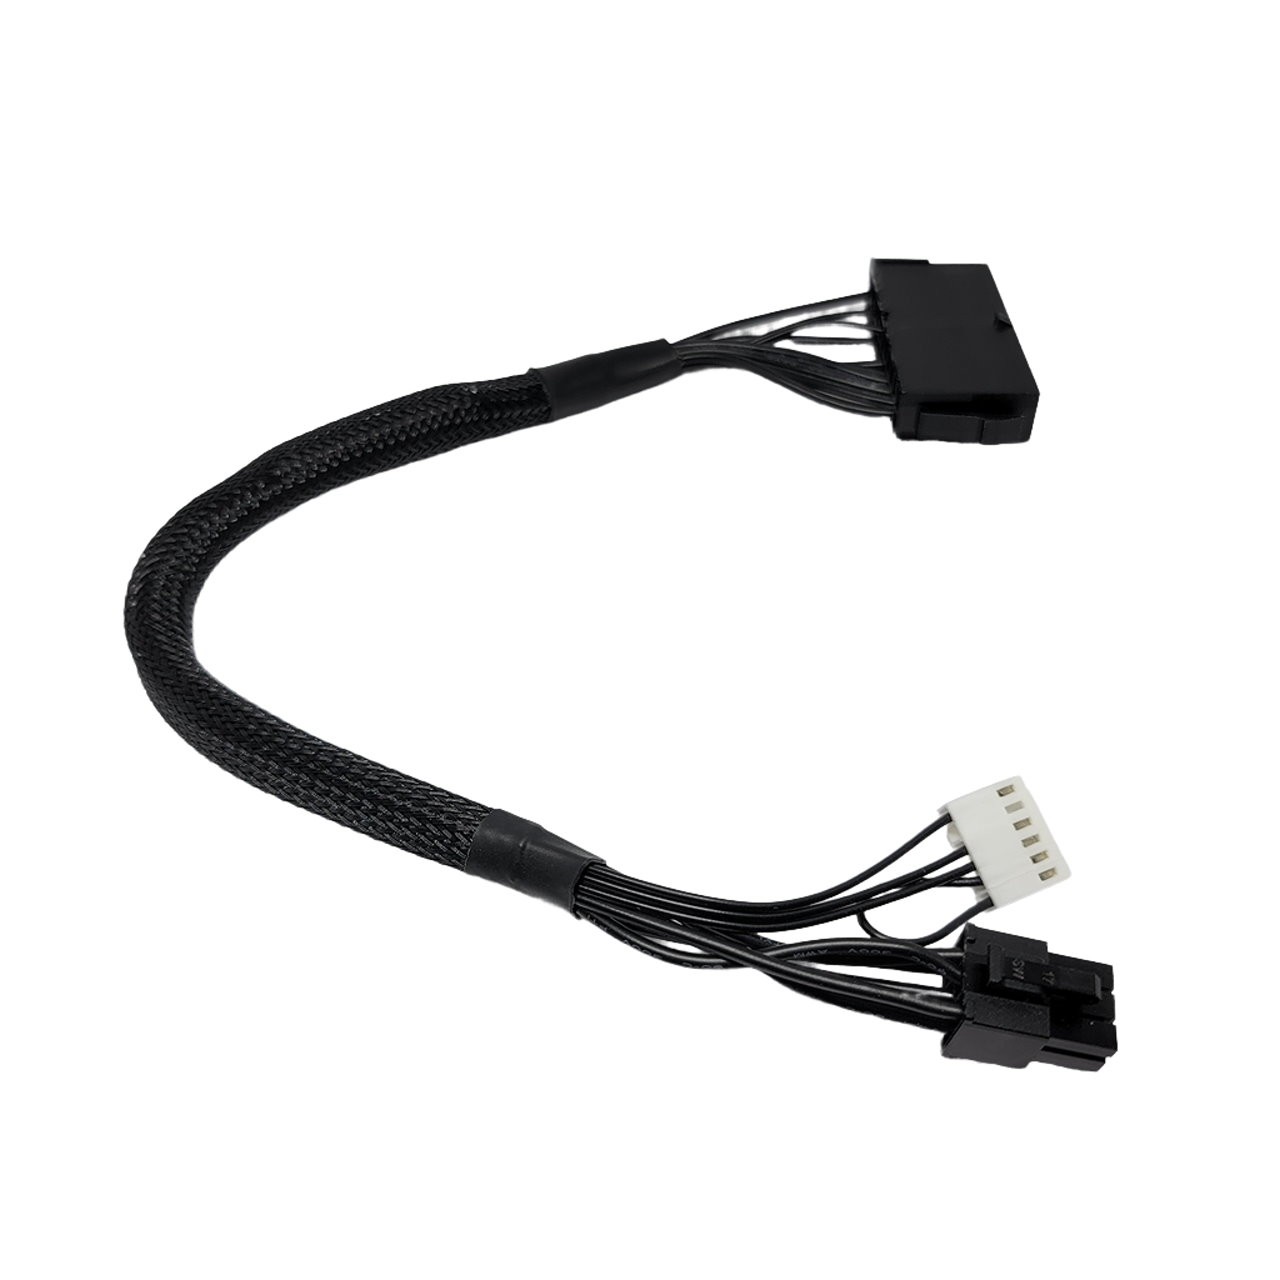 HP_Z240_ProDesk_600_Compaq_Elite_8300_CMT_PSU_Main_Power_24-Pin_to_6-Pin_Adapter_Cable_%28Standard%29__73021_zoom.jpg